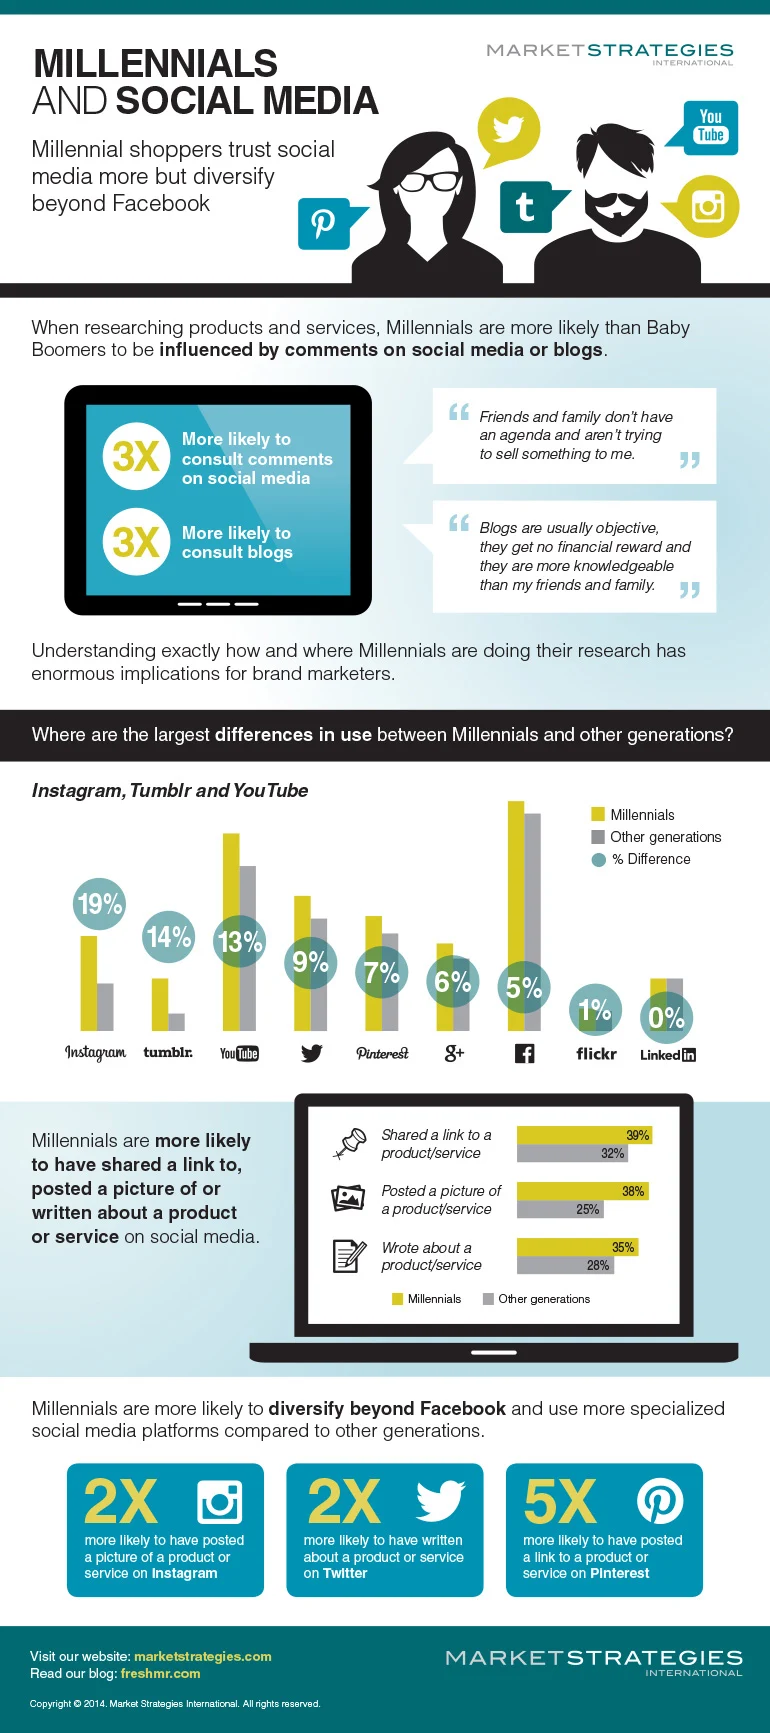 How To Market To Millennials - infographic